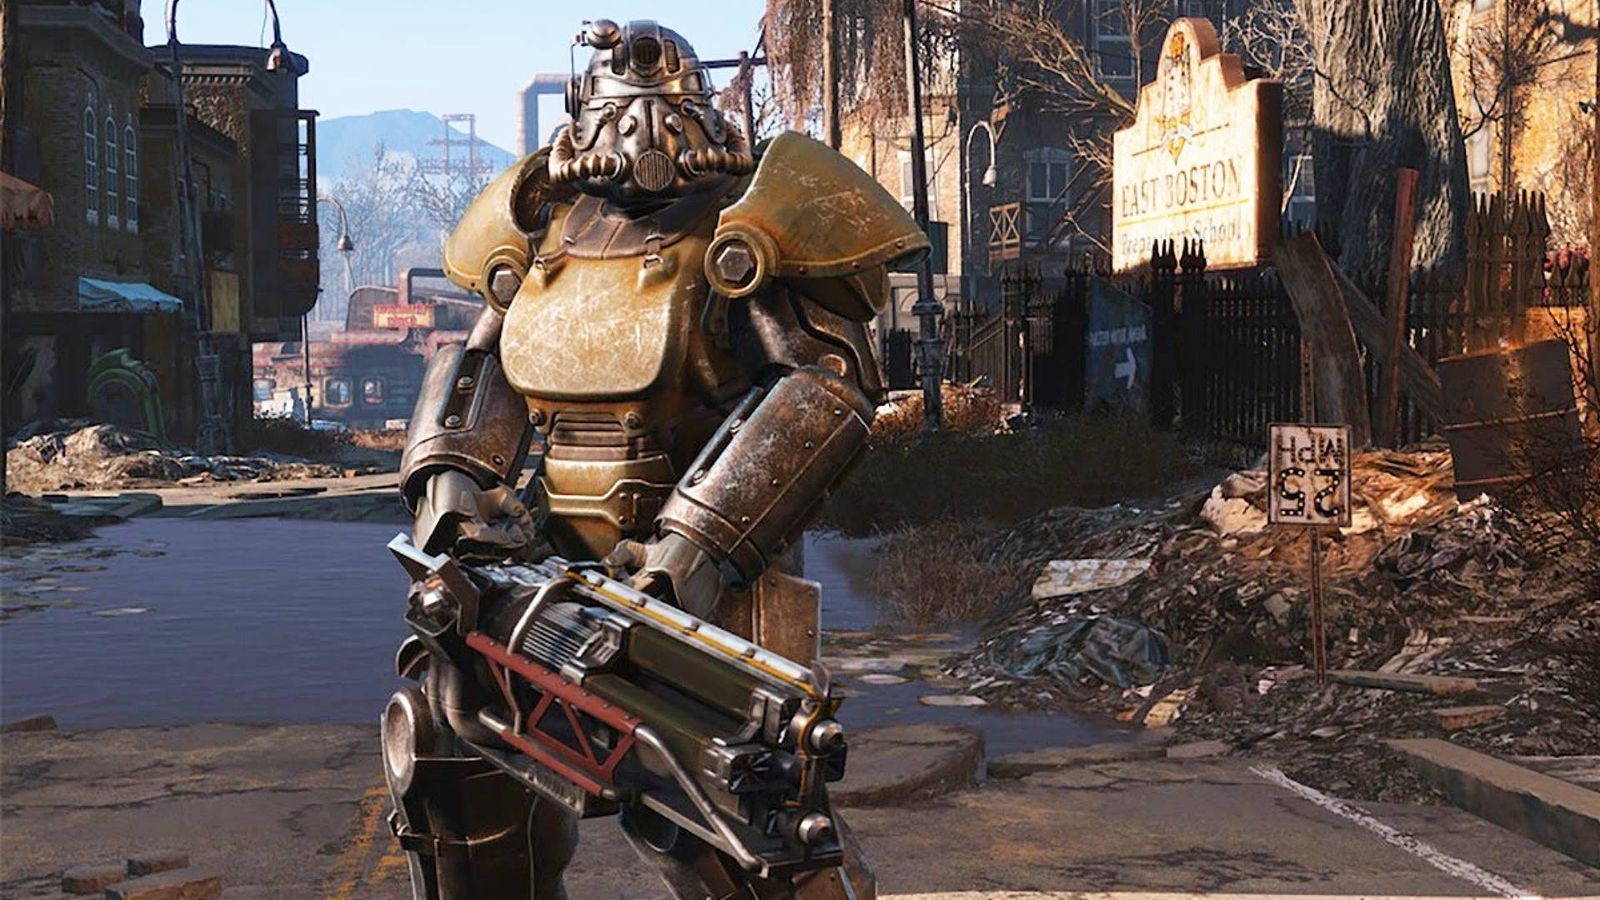 Power Armor in Fallout 4